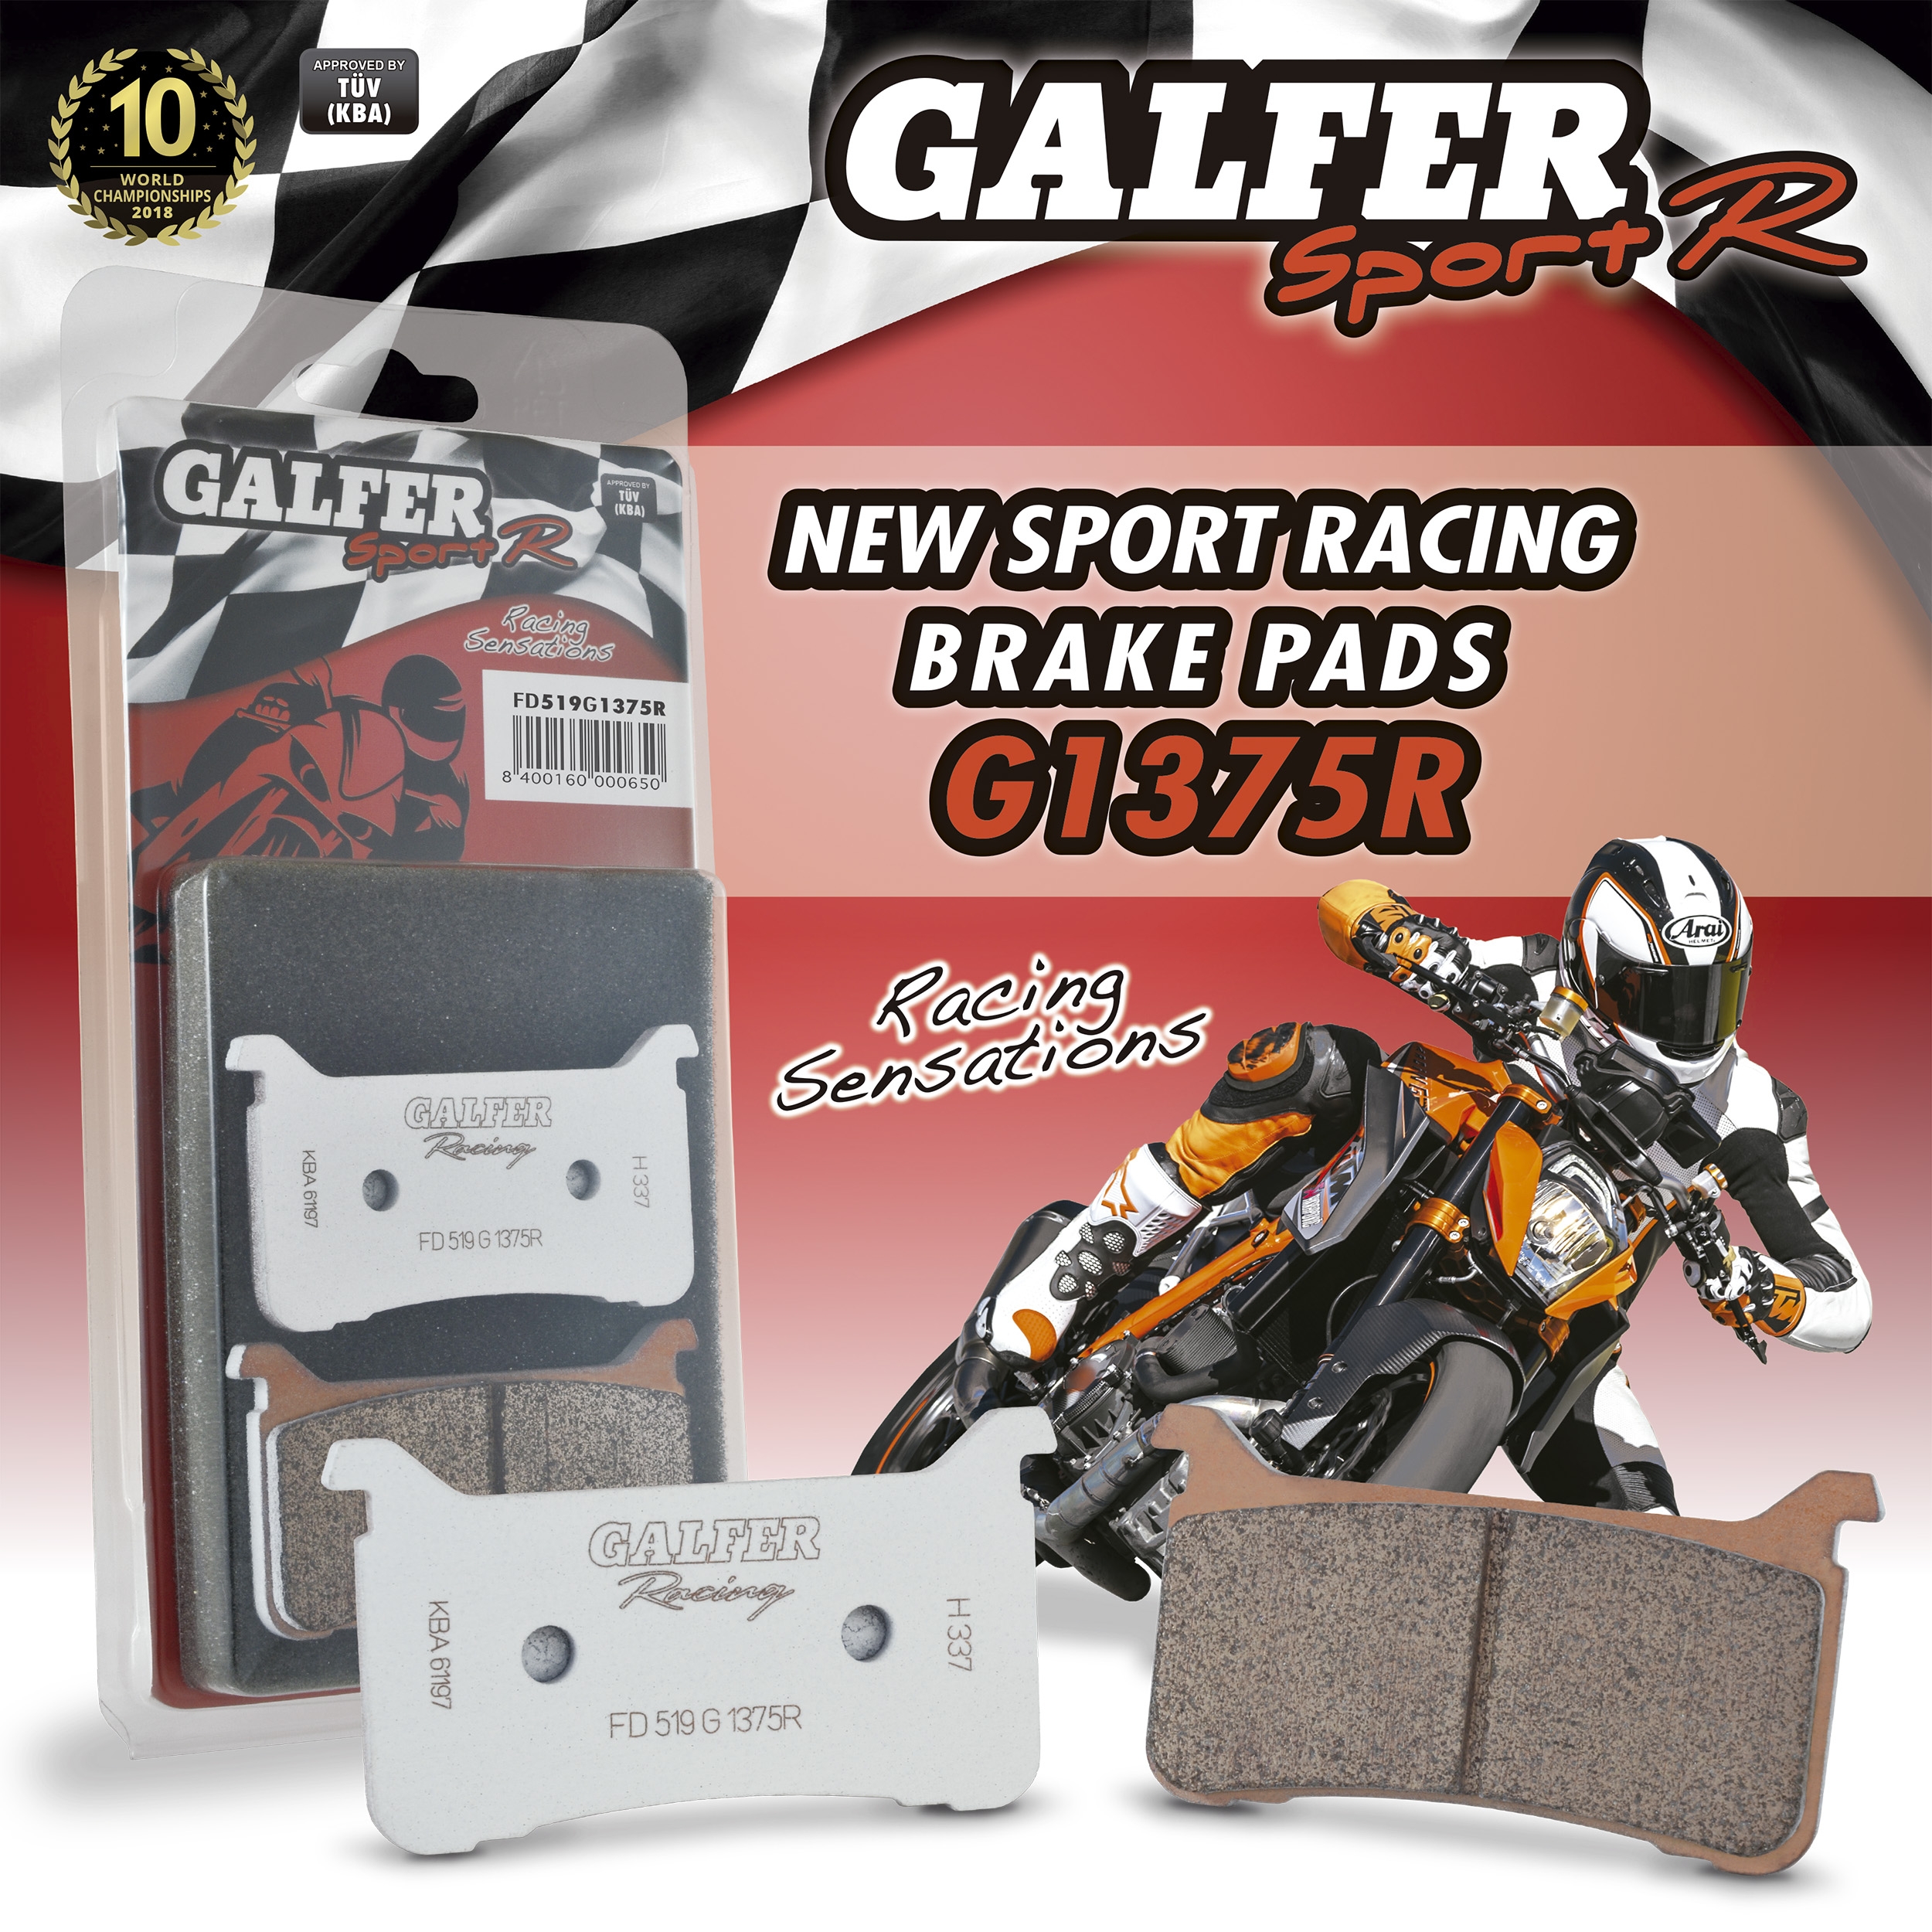 Carbon for Yamaha On-Off Road Motorcycles Galfer Rear Brake Pads 